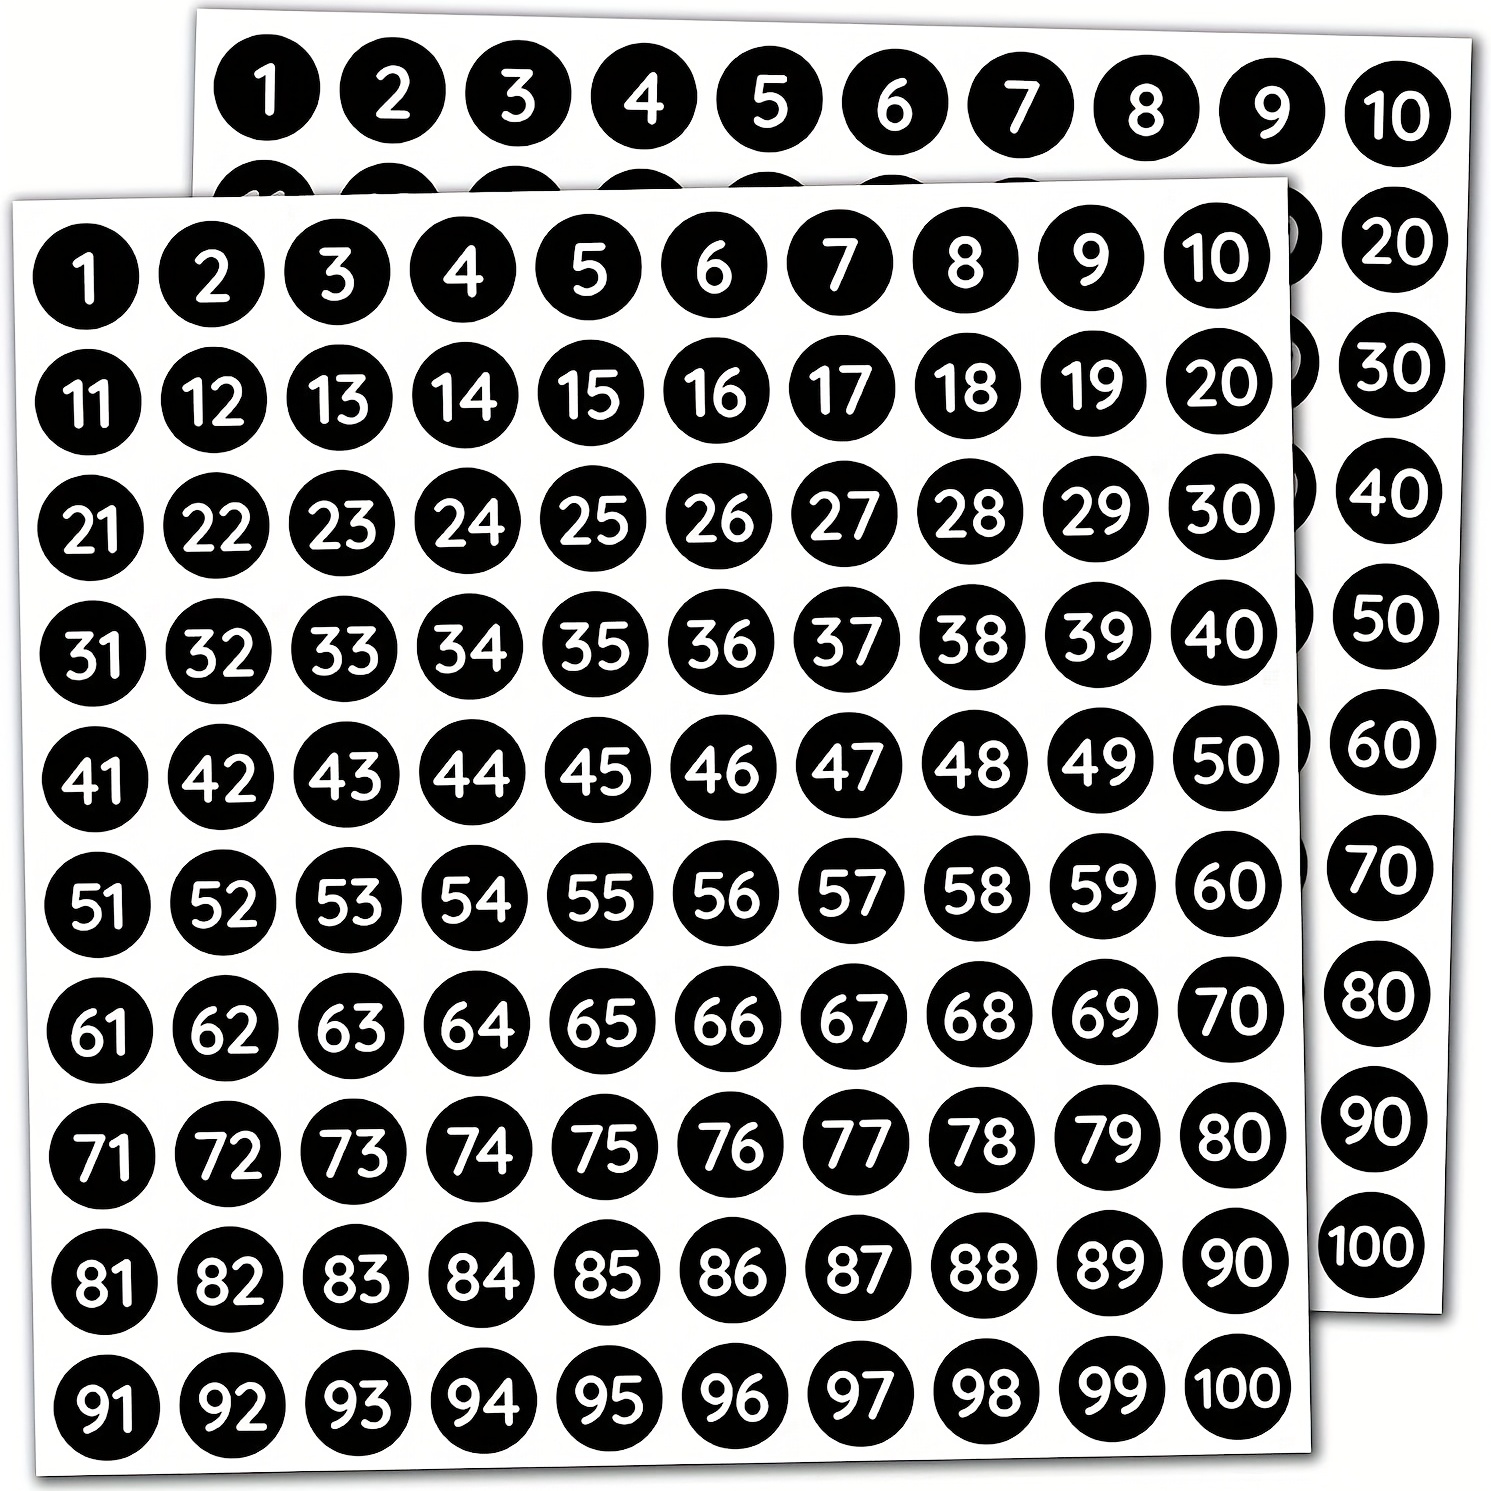 1-100 Vinyl Number Stickers 10mm Small Round Self-Adhesive